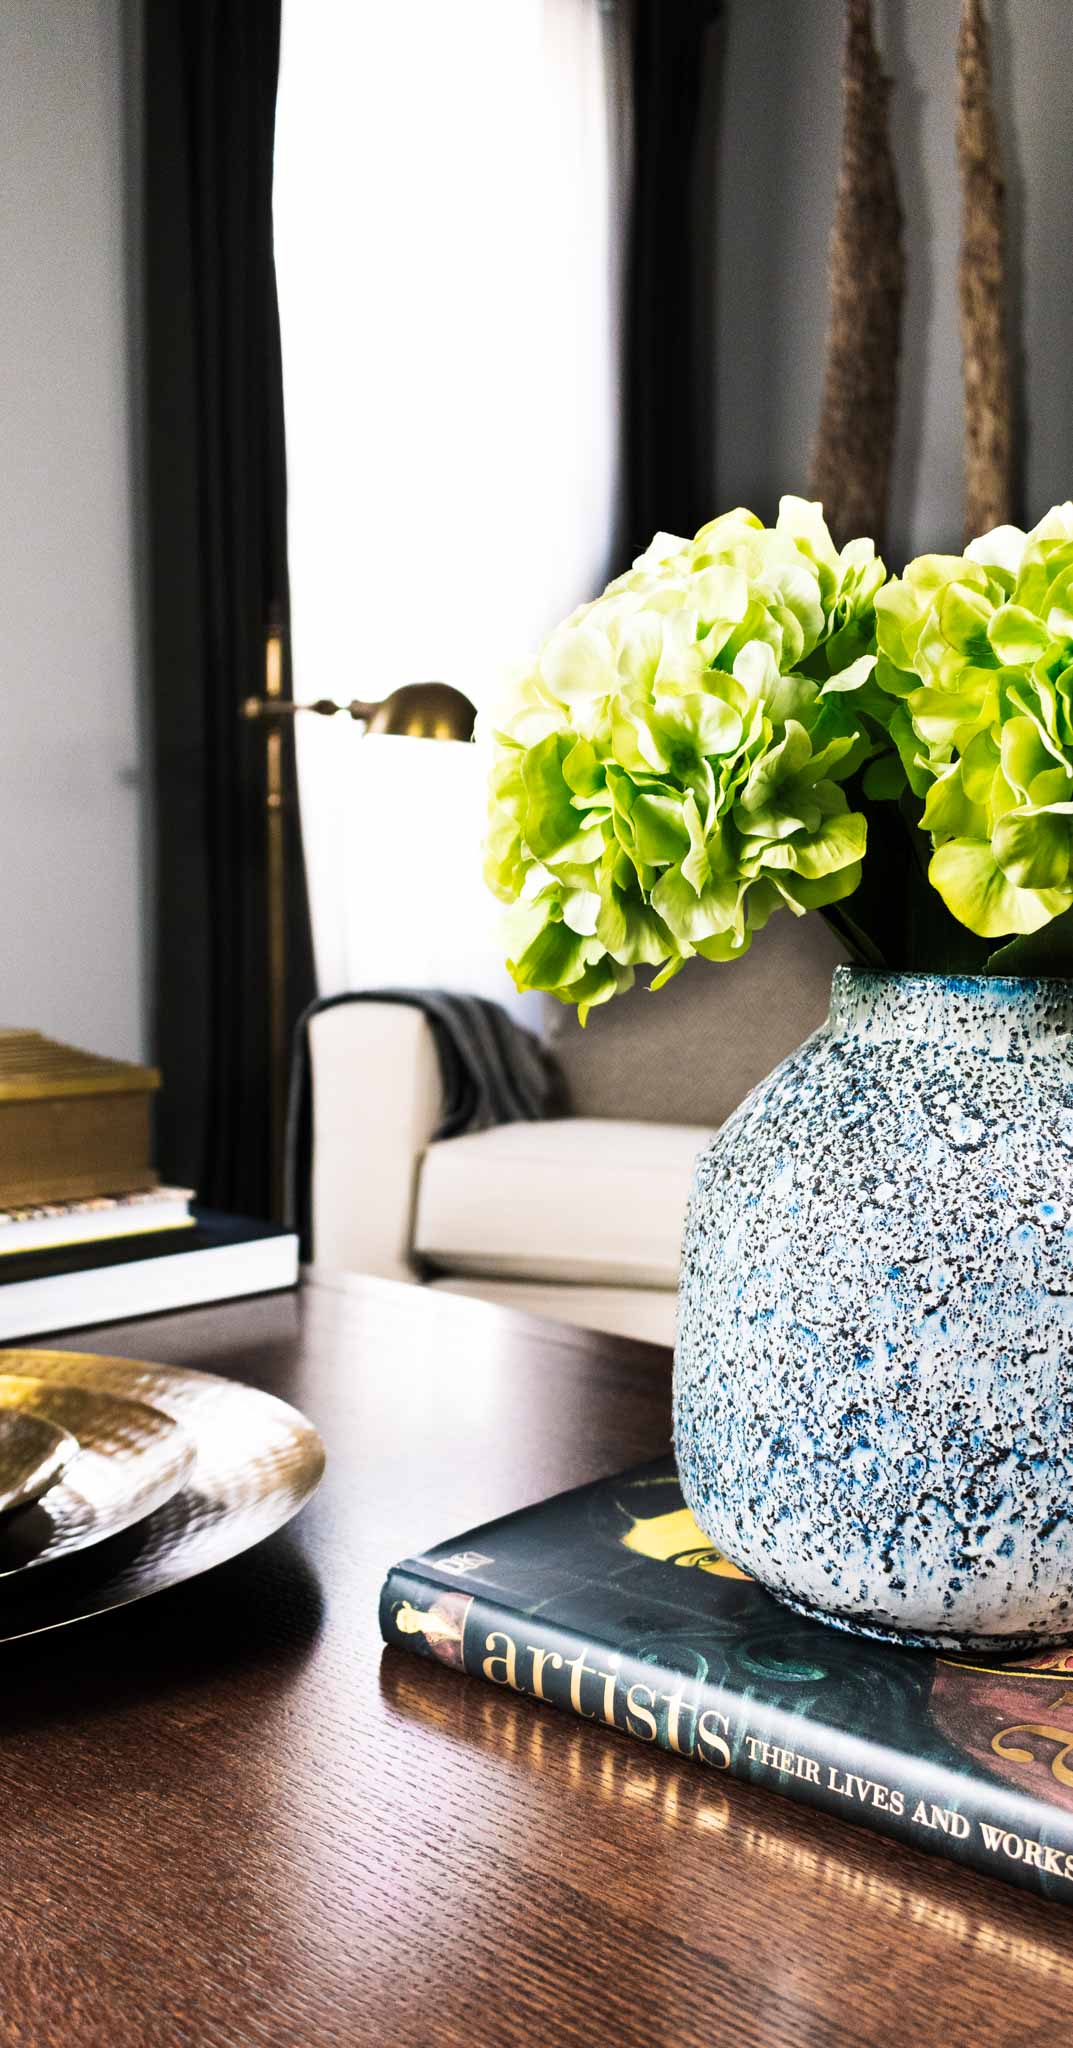 Handcrafted ceramic vase with rough textured surface with white, brown, and blue glazing in living room styled with hydrangeas.